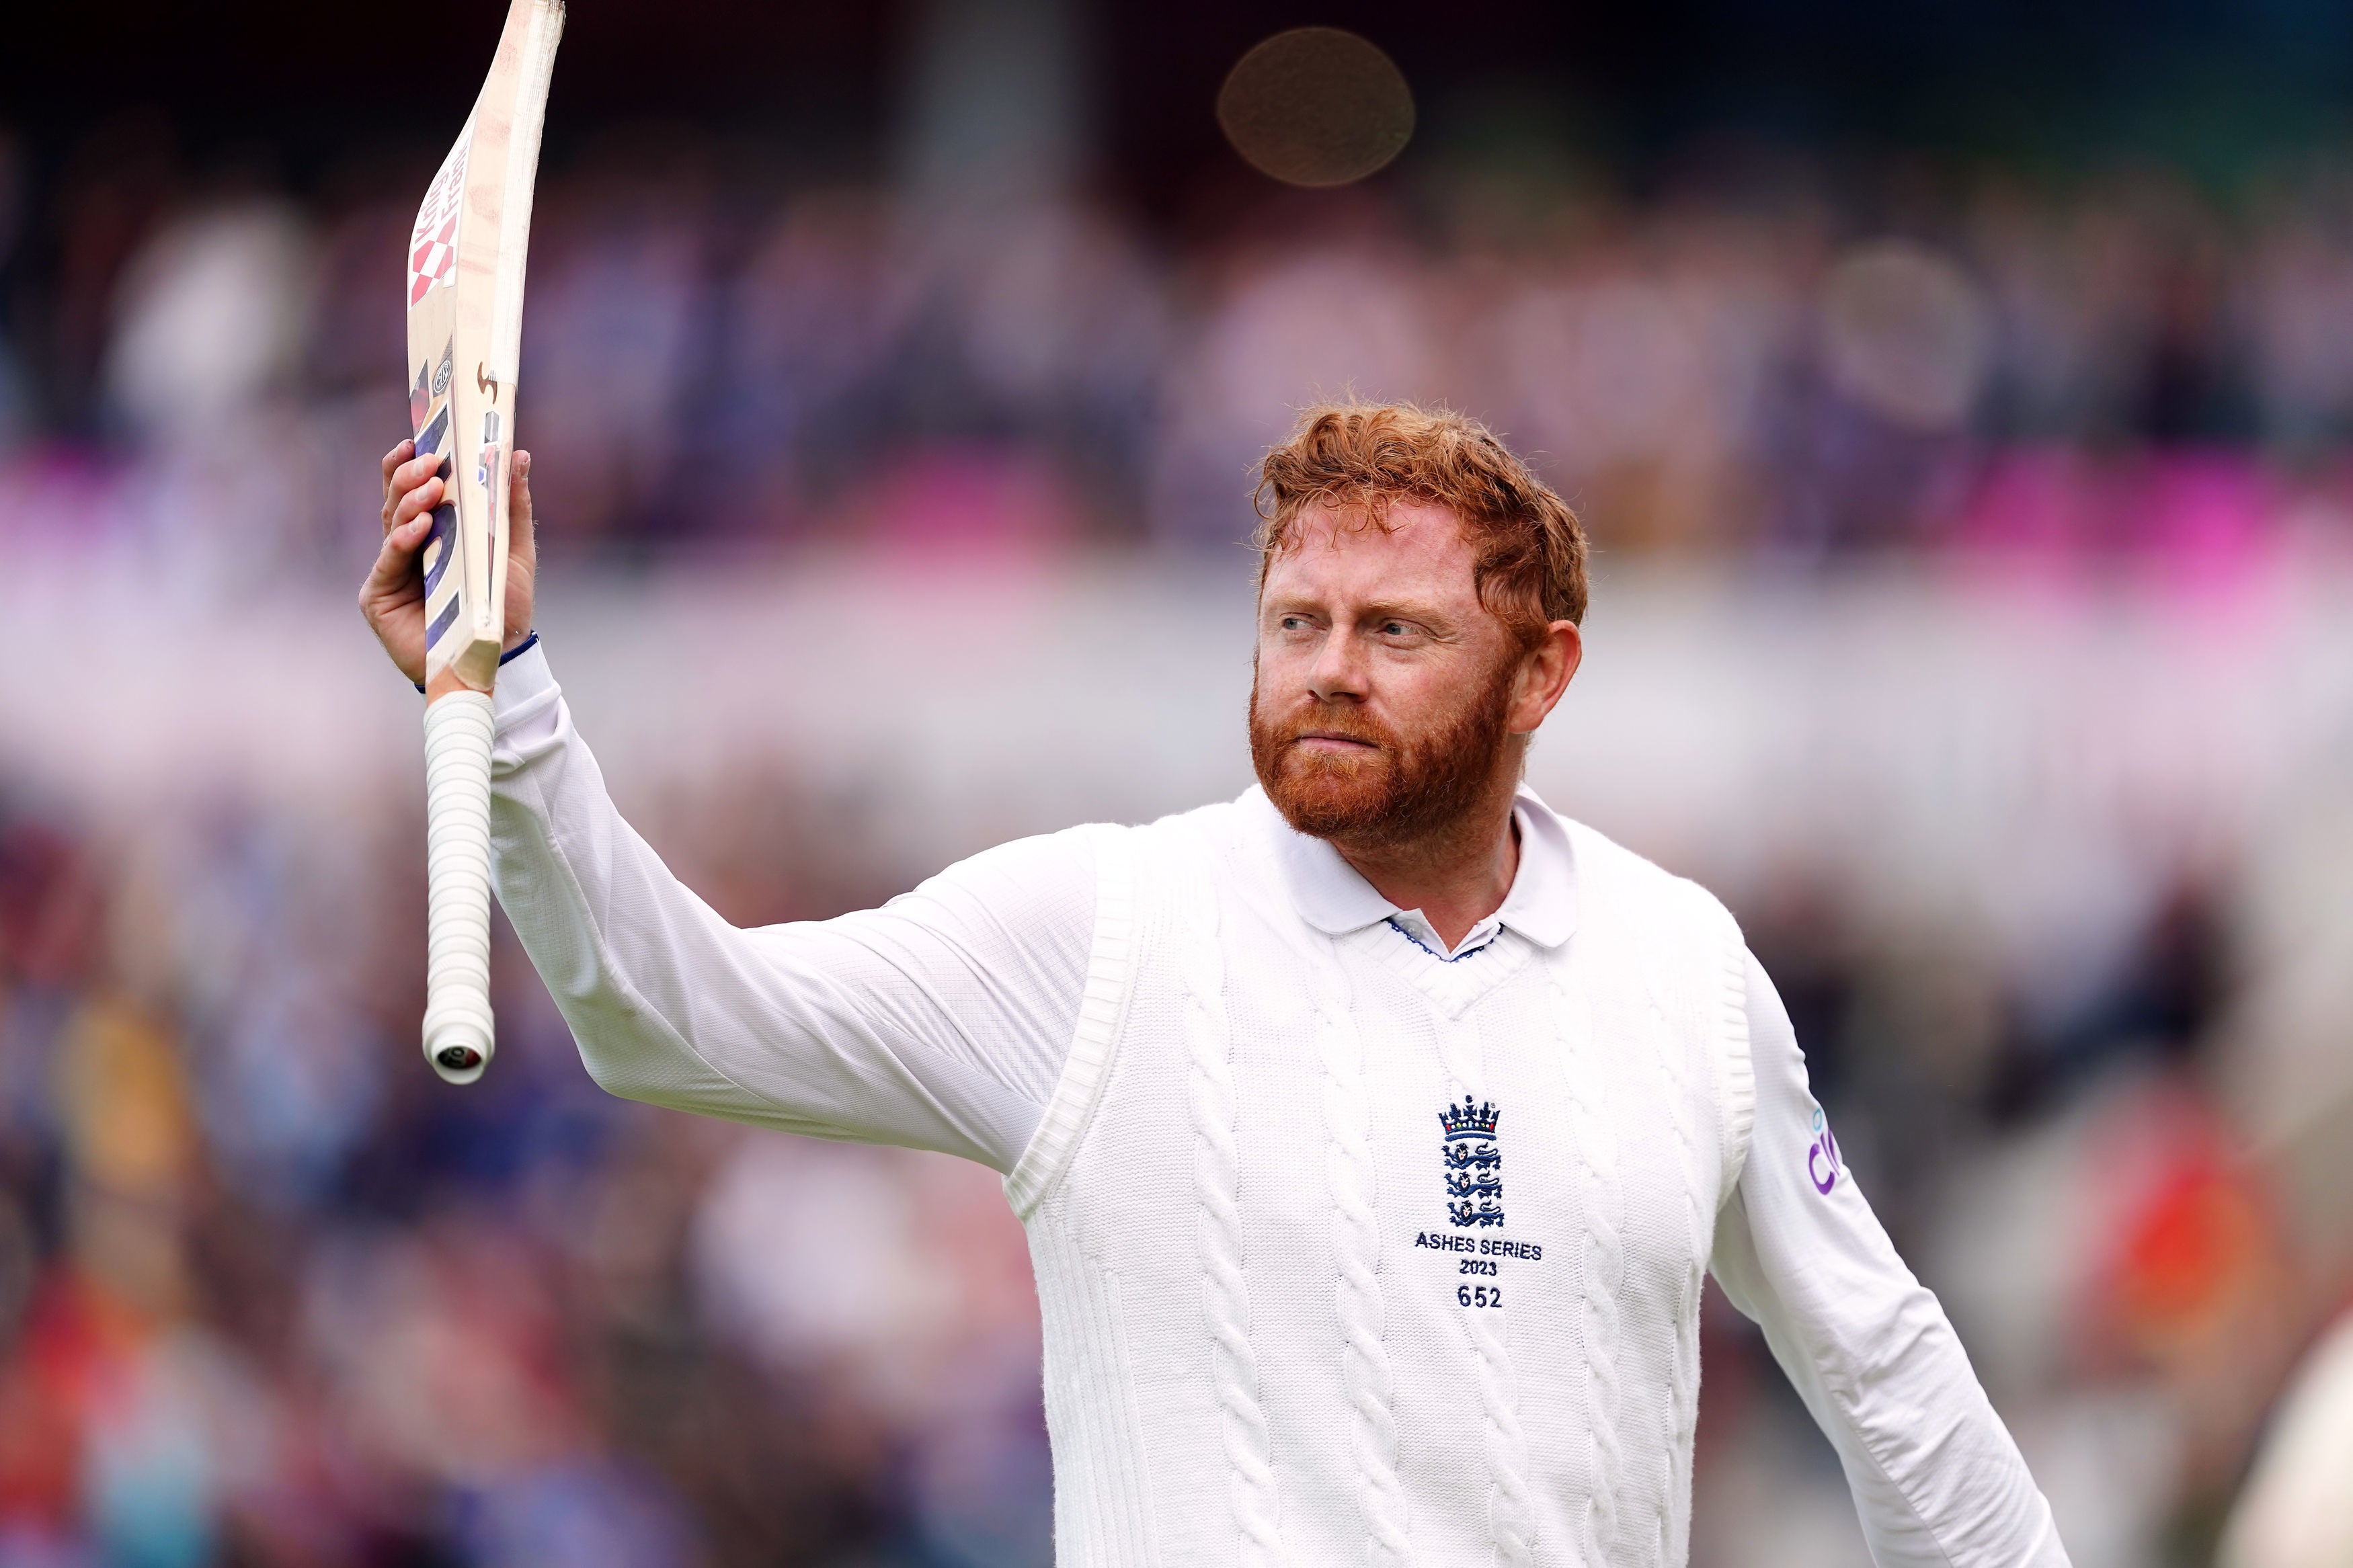 Jonny Bairstow’s unbeaten 99 put England in a strong position to win the fourth Test